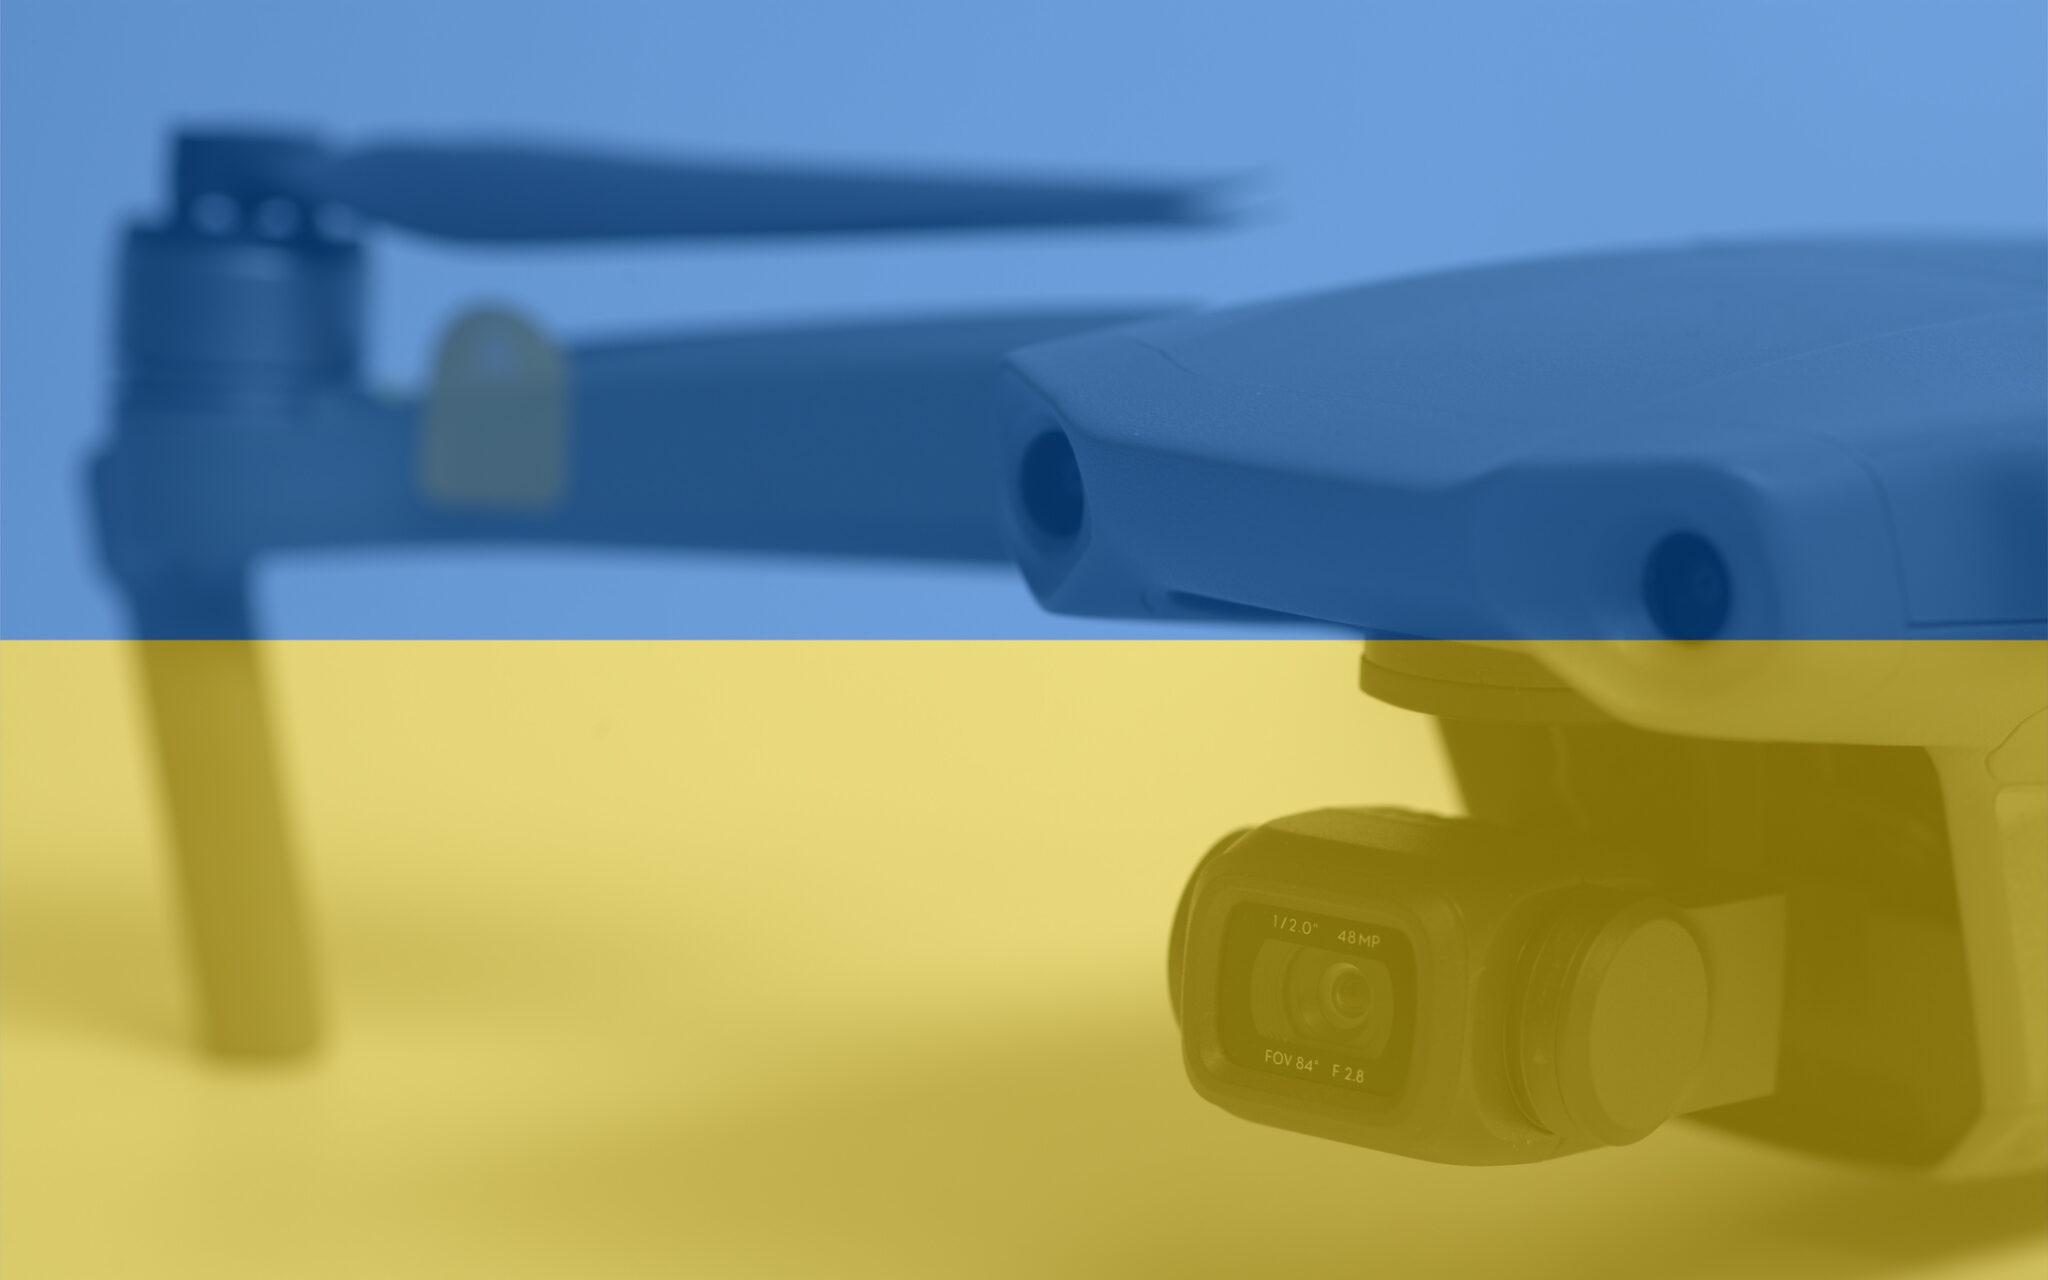 DoD’s Replicator Drone Concept Builds on Lessons Learned in Ukraine